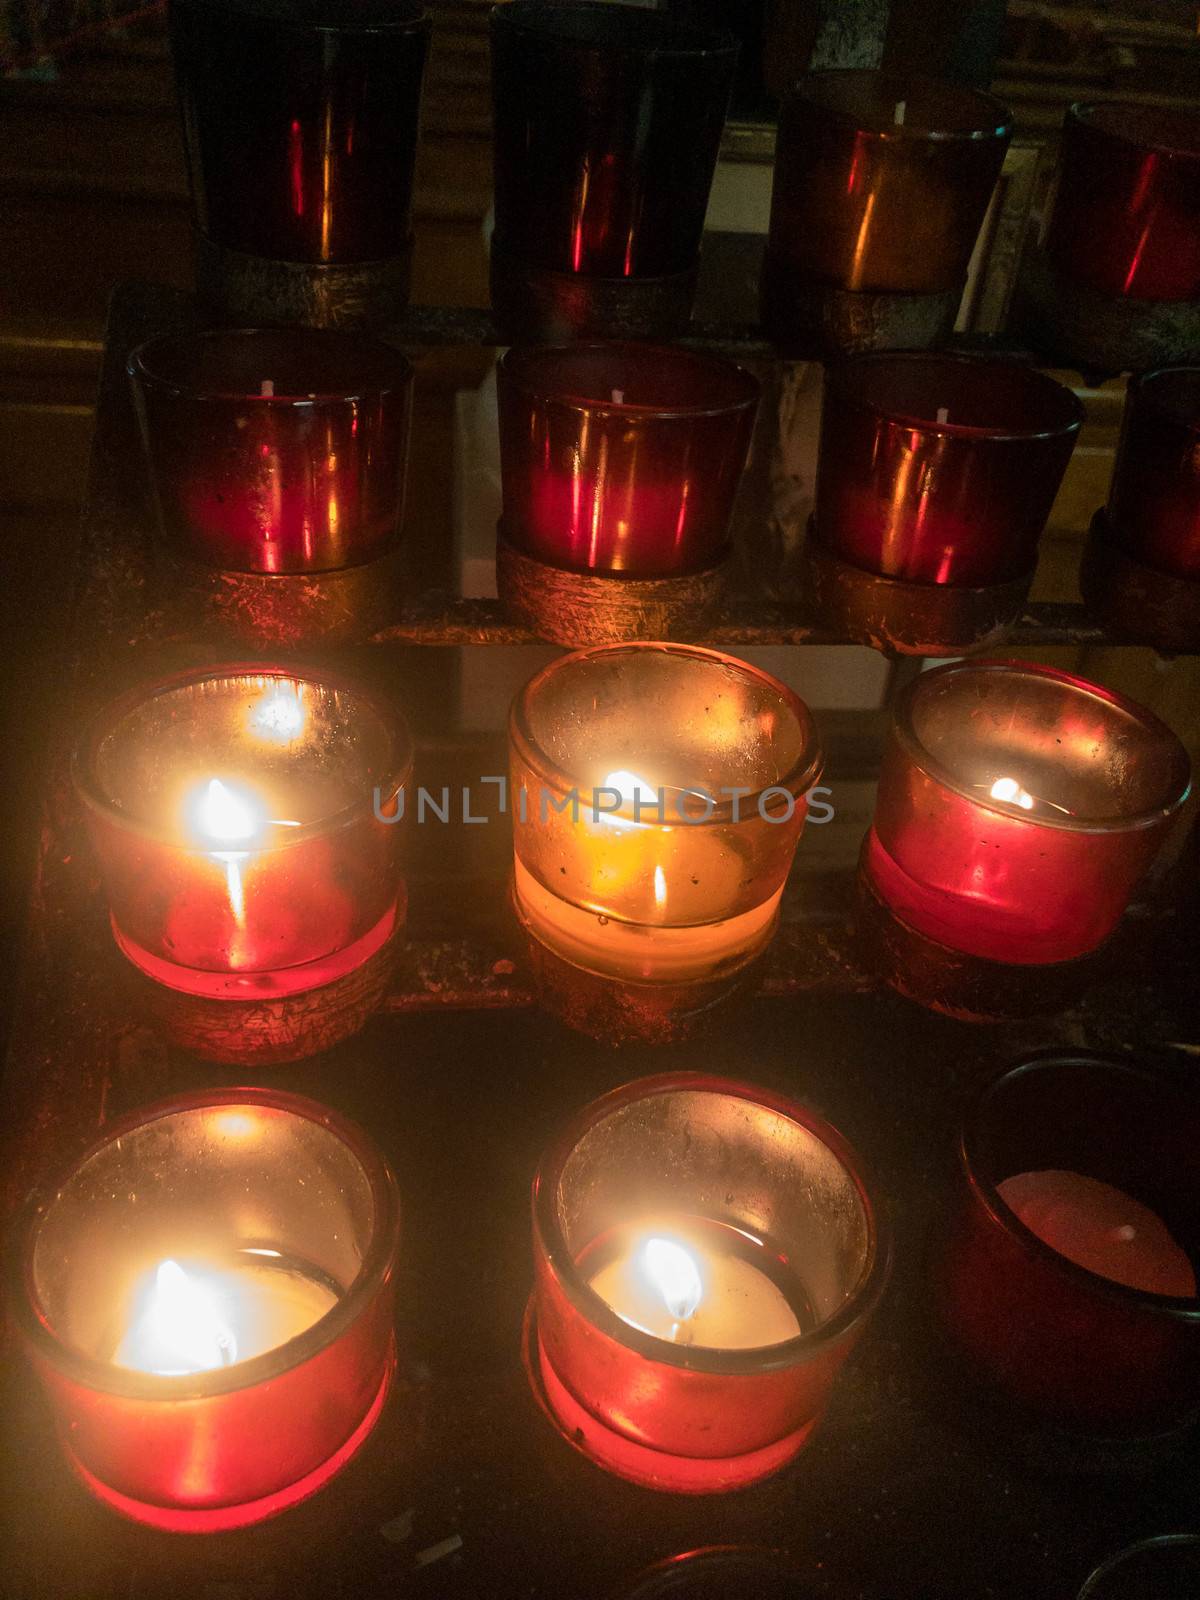 Tiered rows of tiny votive candles flicker and glow in a dark church.